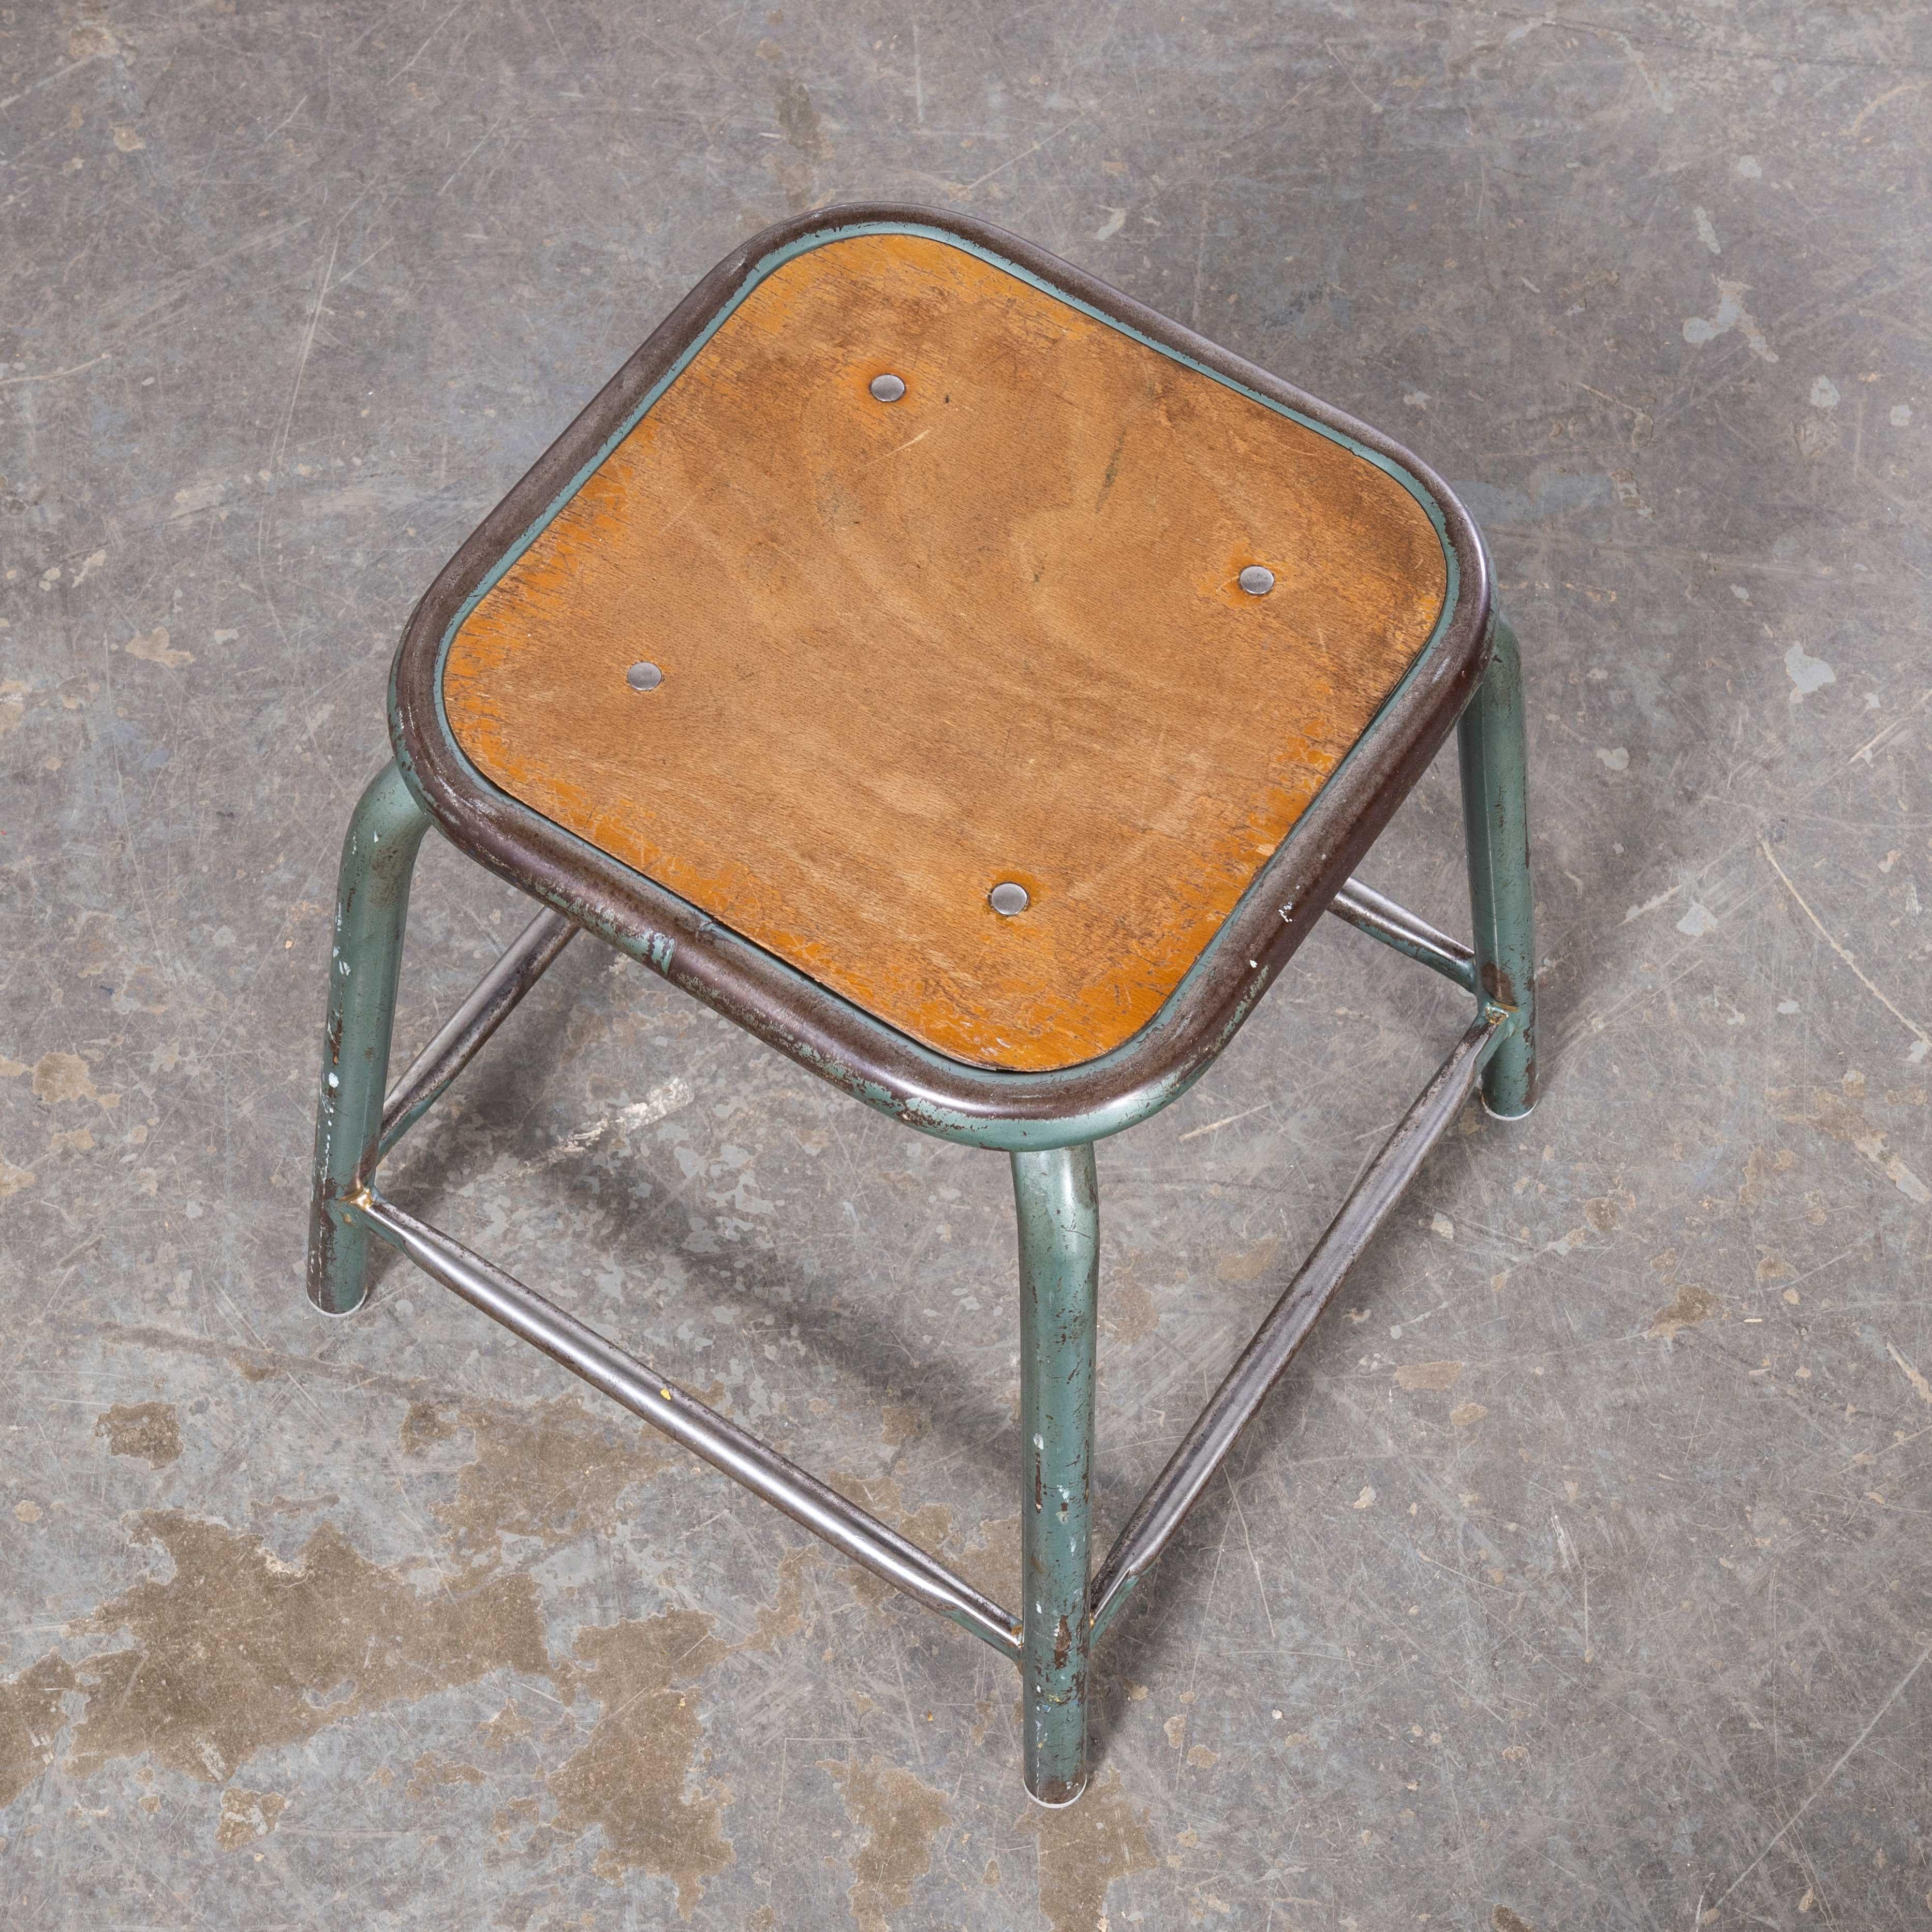 1960’s Mullca Low Stacking Stool – Aqua – Set Of Four
1960’s Mullca Low Stacking Stool – Aqua – Set Of Four. In 1947 Robert Muller and Gaston Cavaillon created the company that went on to develop arguably the most famous French school chair. Sadly